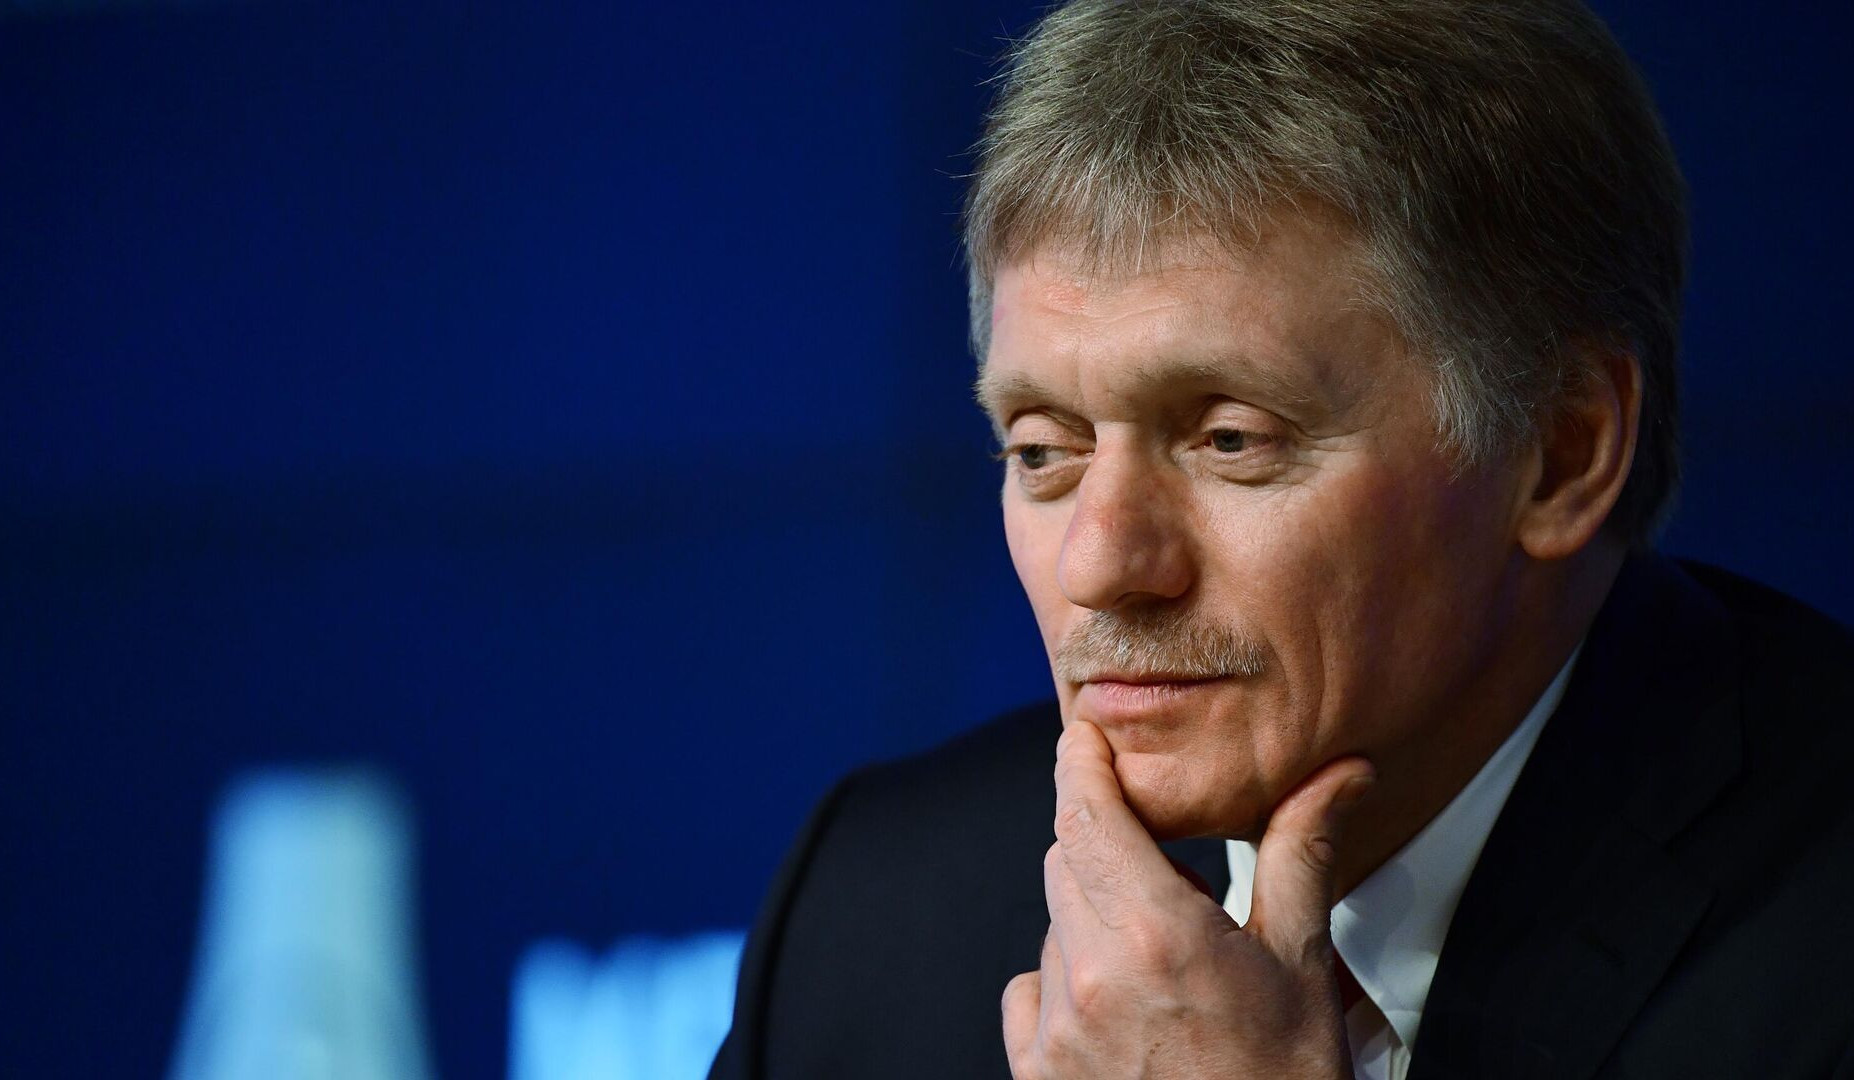 Moscow waits for Kyiv to accept its demands, understand realities: Peskov